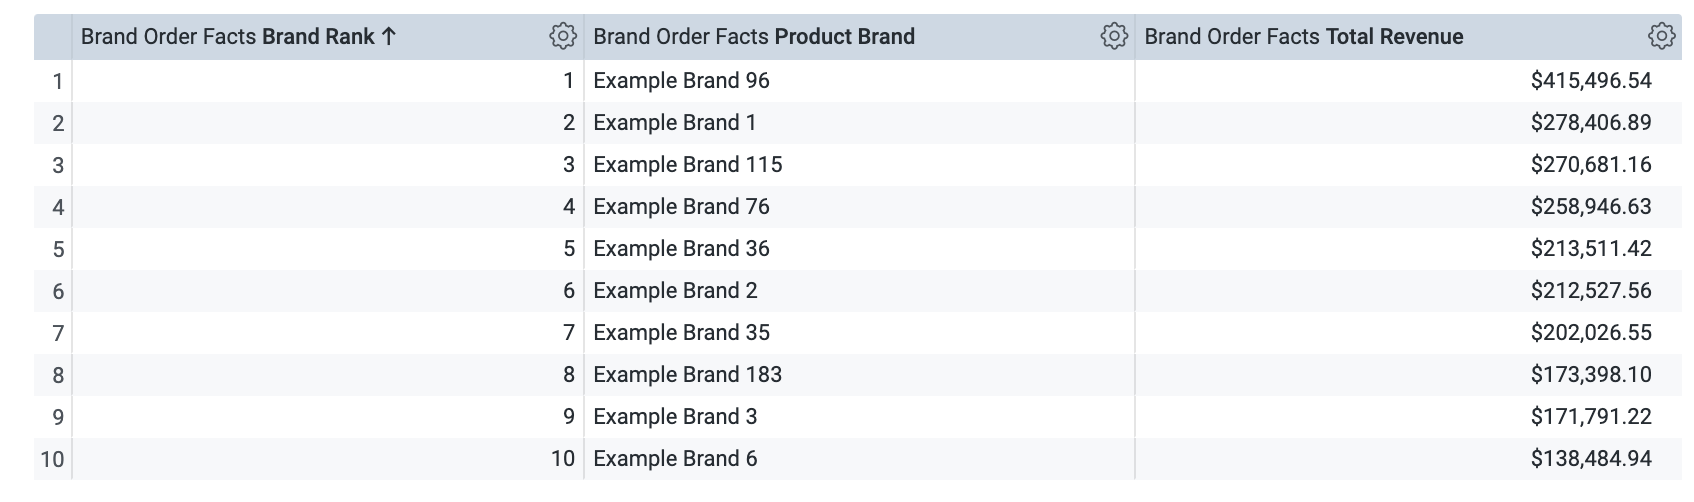 Output result table displaying 10 rows of data under the column headings: Brand Order Facts Brand Rank, Brand Order Facts Product Brand, and Brand Order Facts Total Revenue